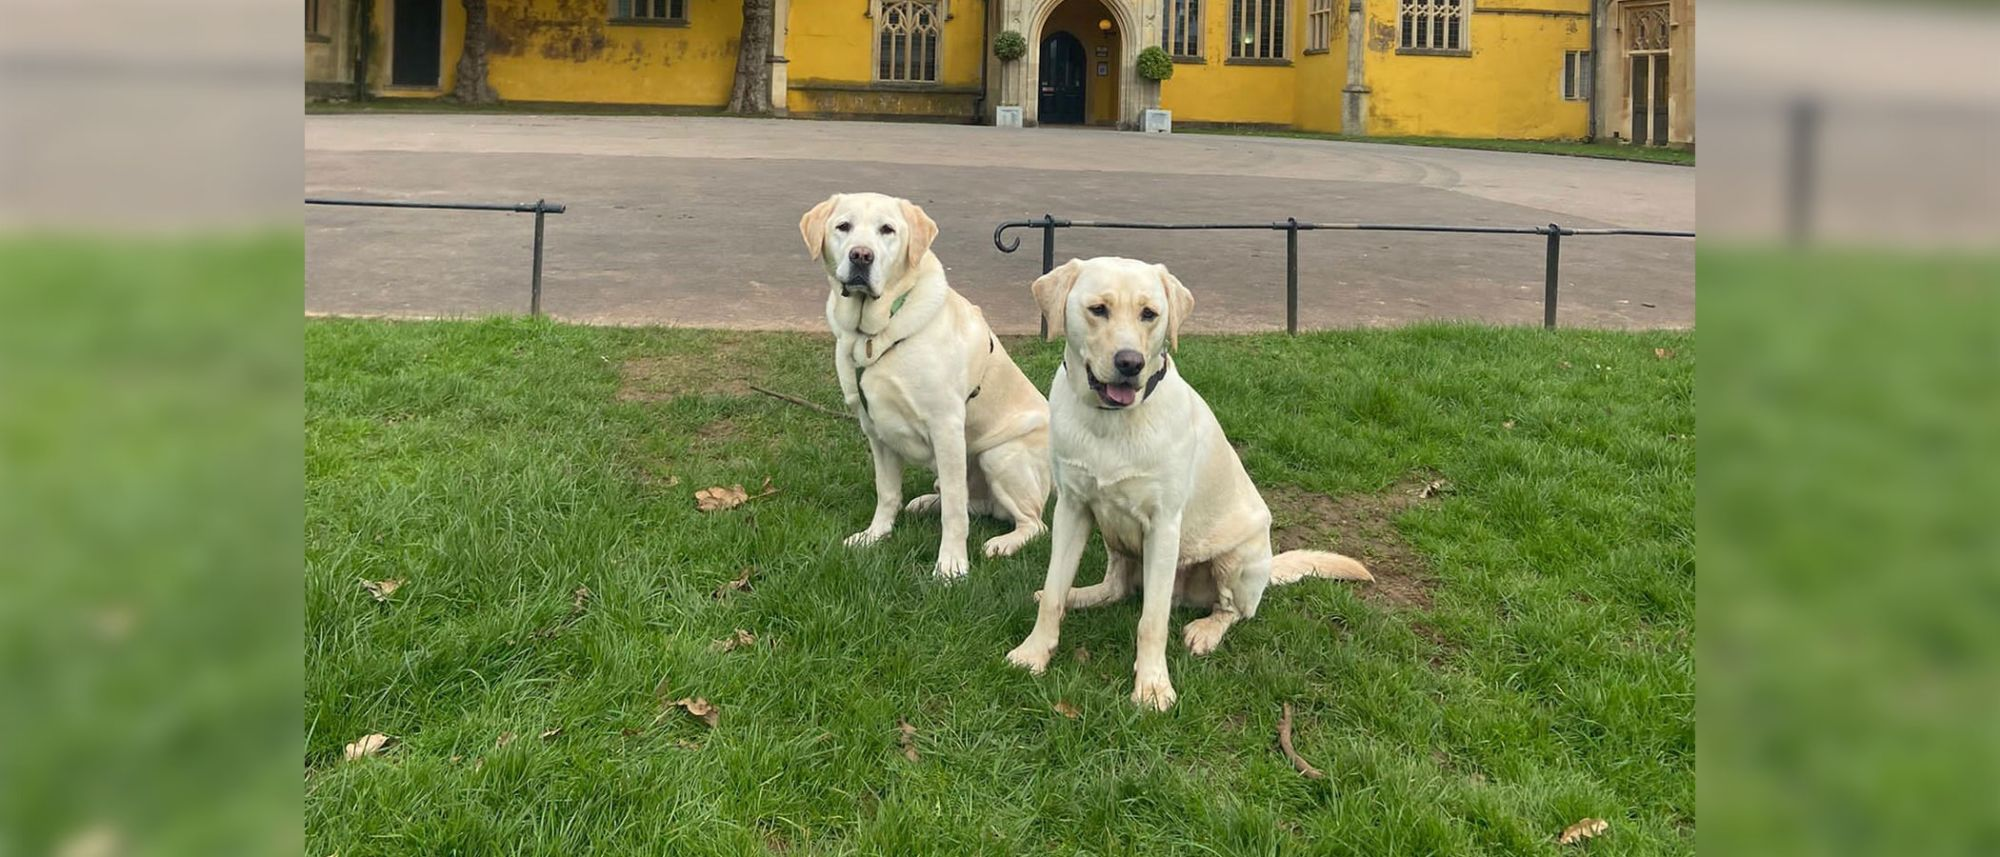 Royal Canin’s Sponsored Guide Dog, Robin, Continues to Thrive With Owner, Mark